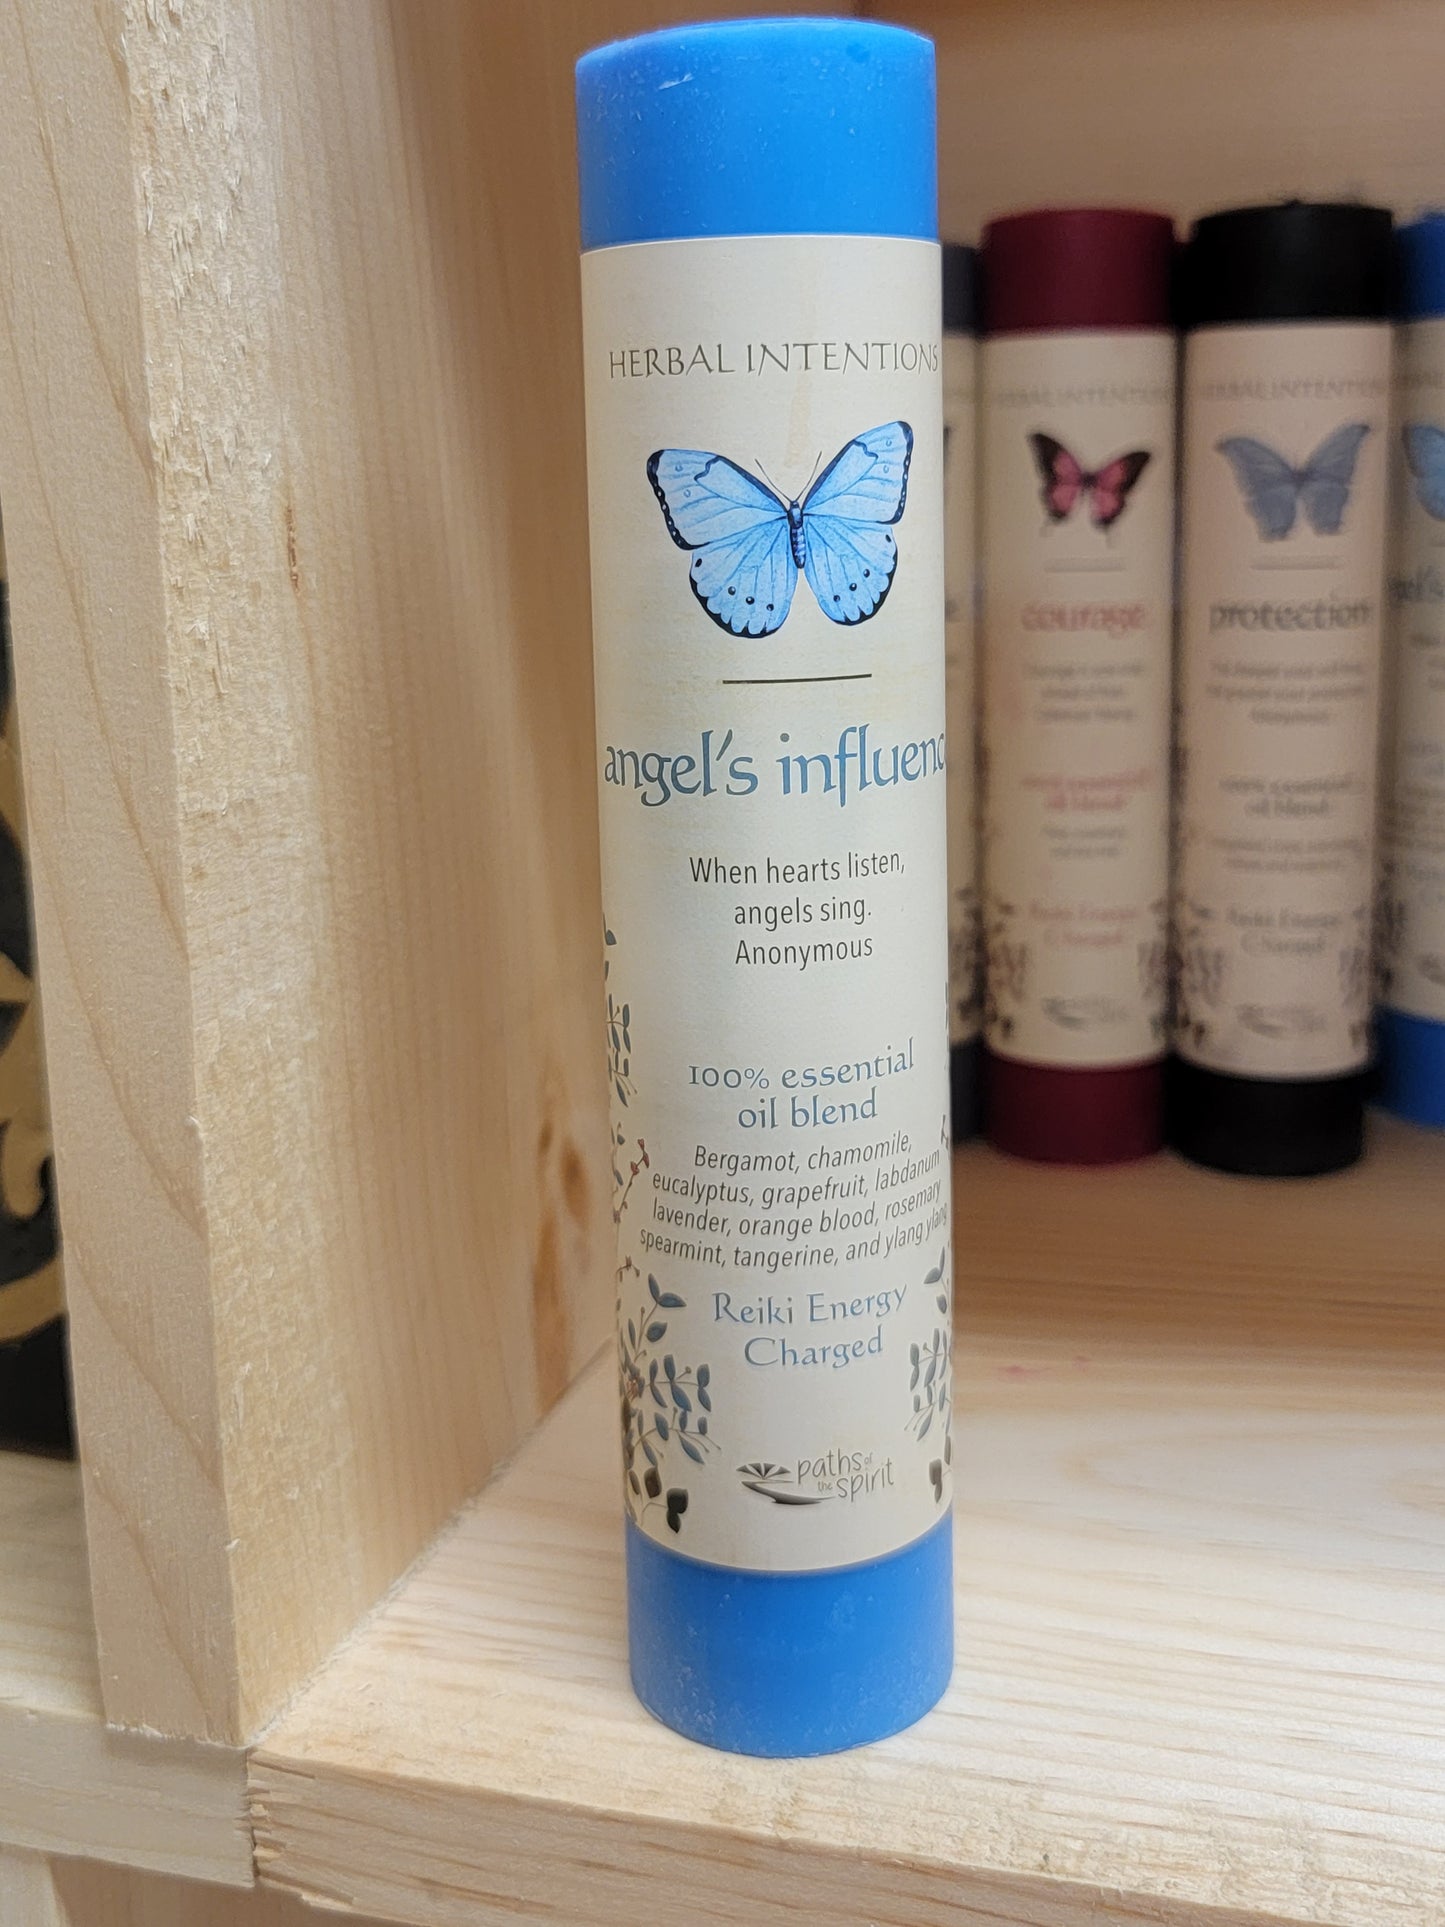 Herbal Intentions Angel's Influence Candle